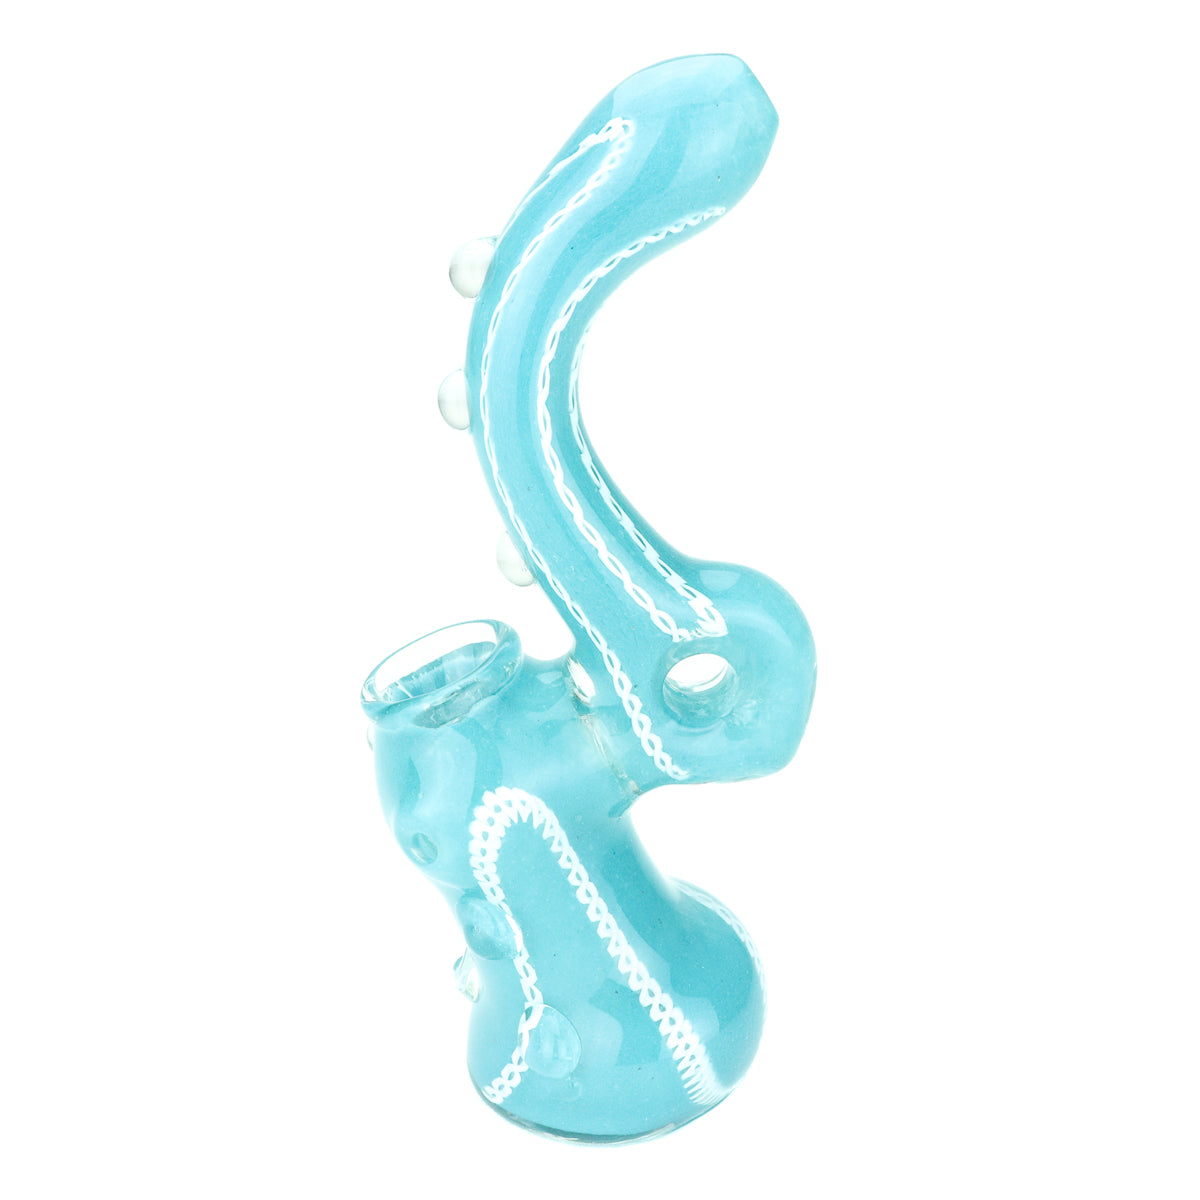 How Bubbler Pipes Has Become The Most Sought-After Trend In 2022